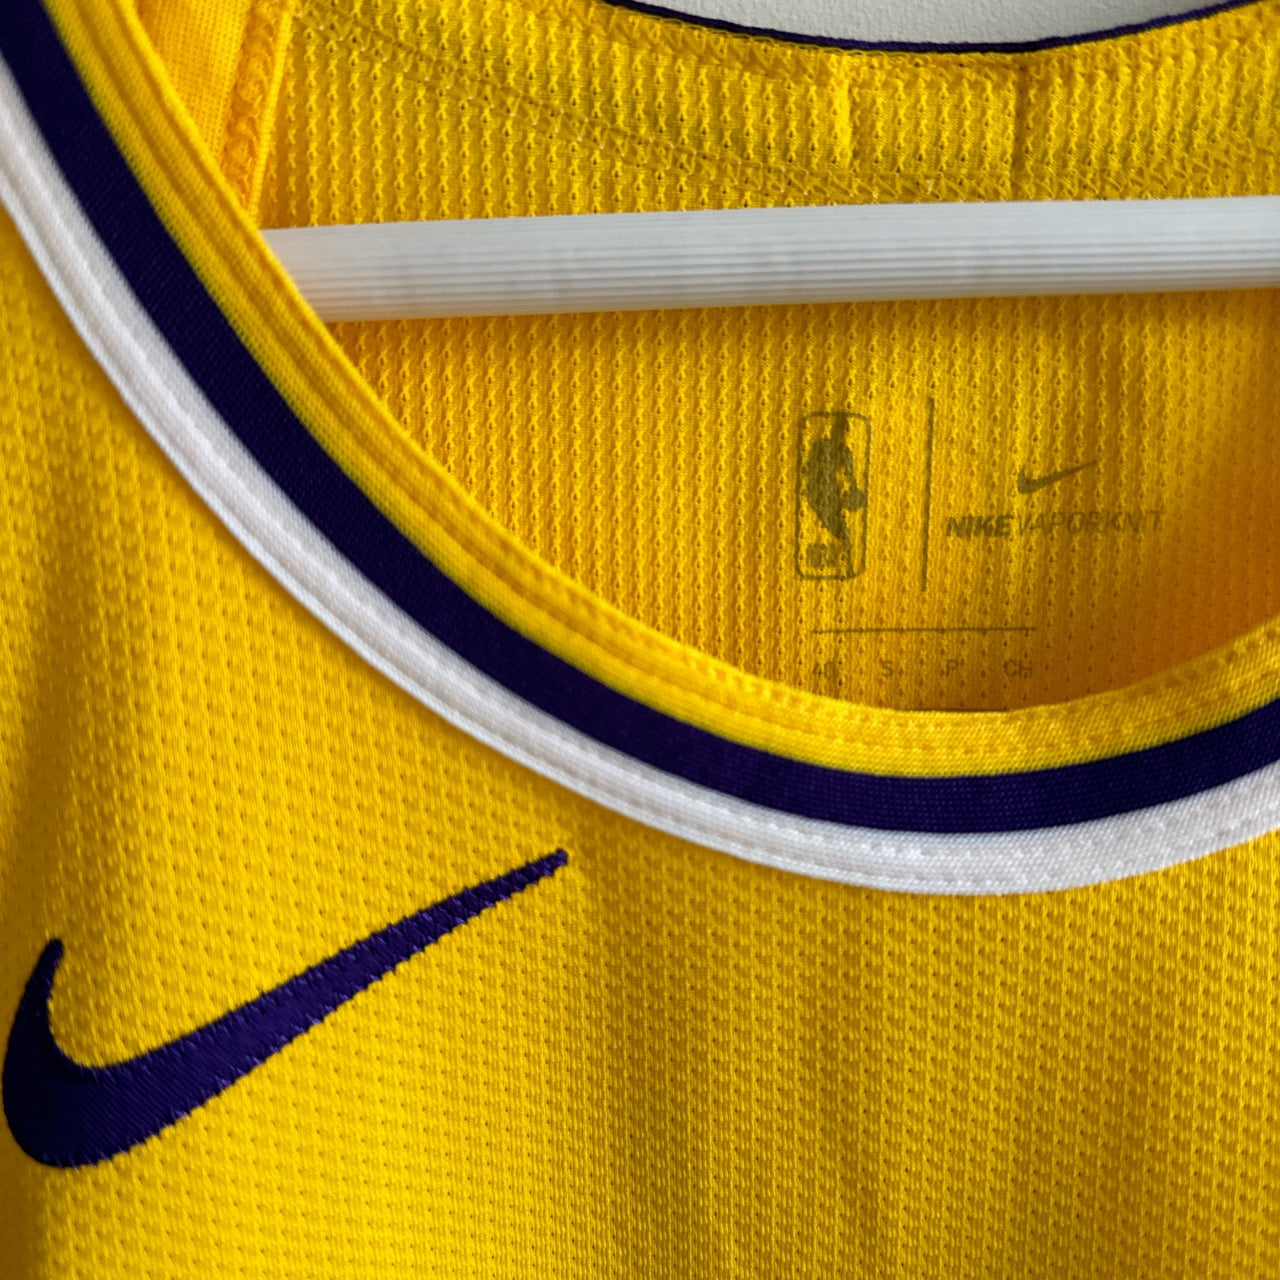 Los Angeles Lakers Lebron James Nike authentic jersey - Small